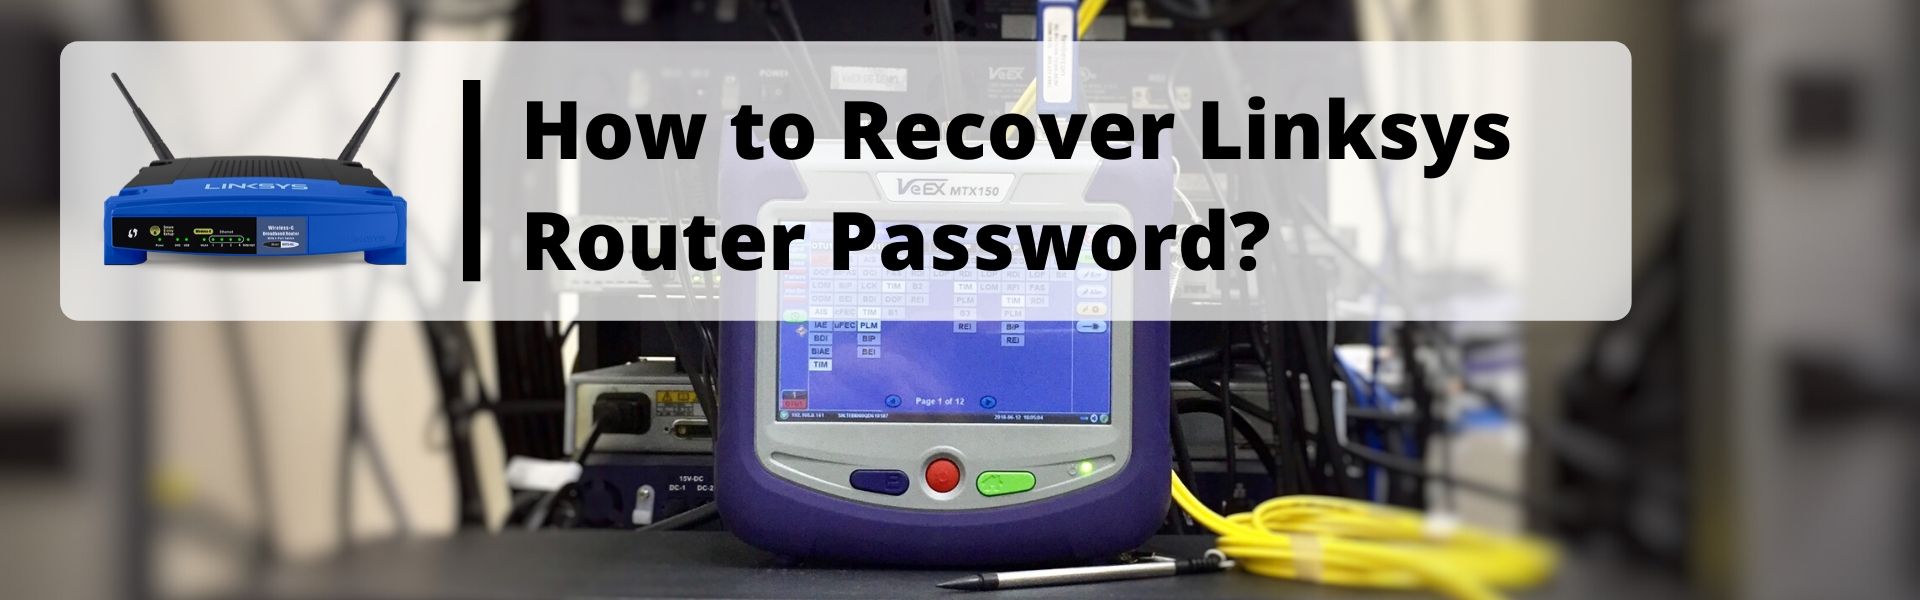 2020-01-29-01-54-45How to Recover Linksys Router Password